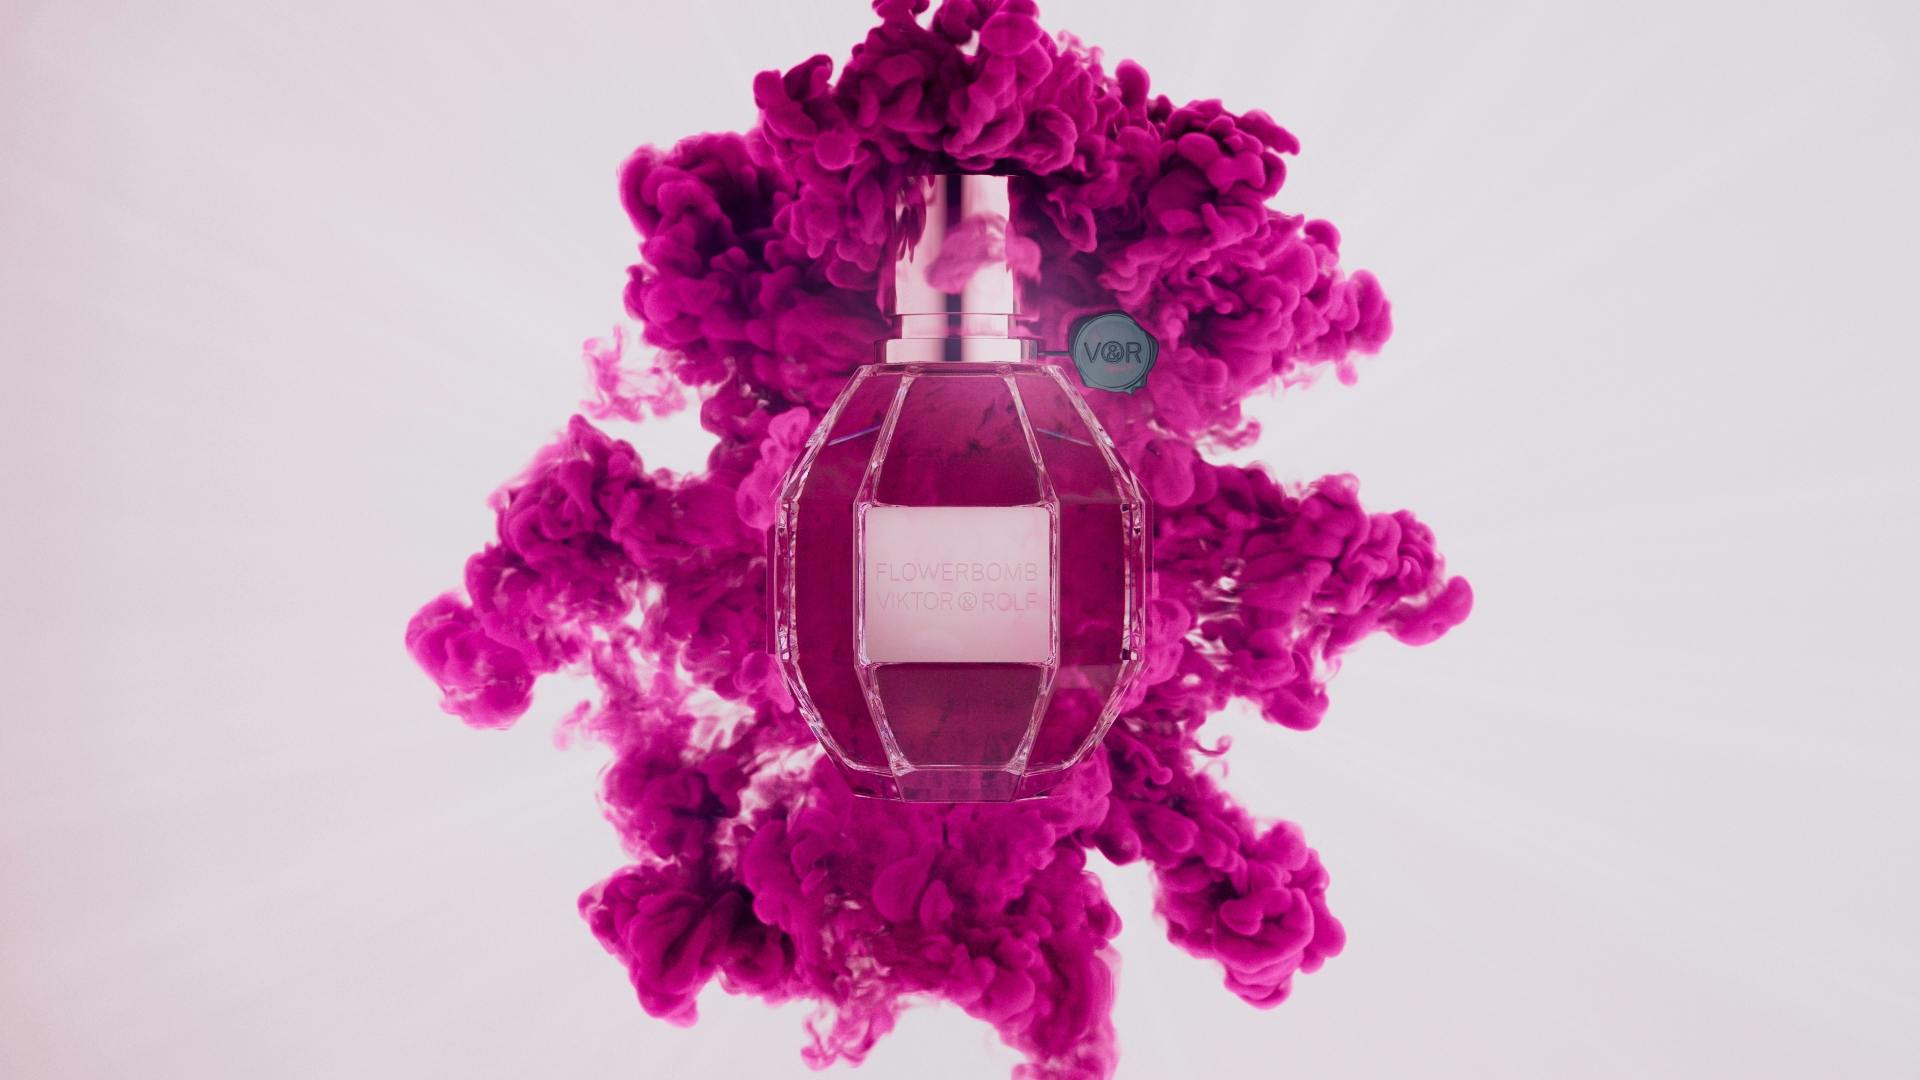 victor_and_rolf_flowerbomb_5.jpg